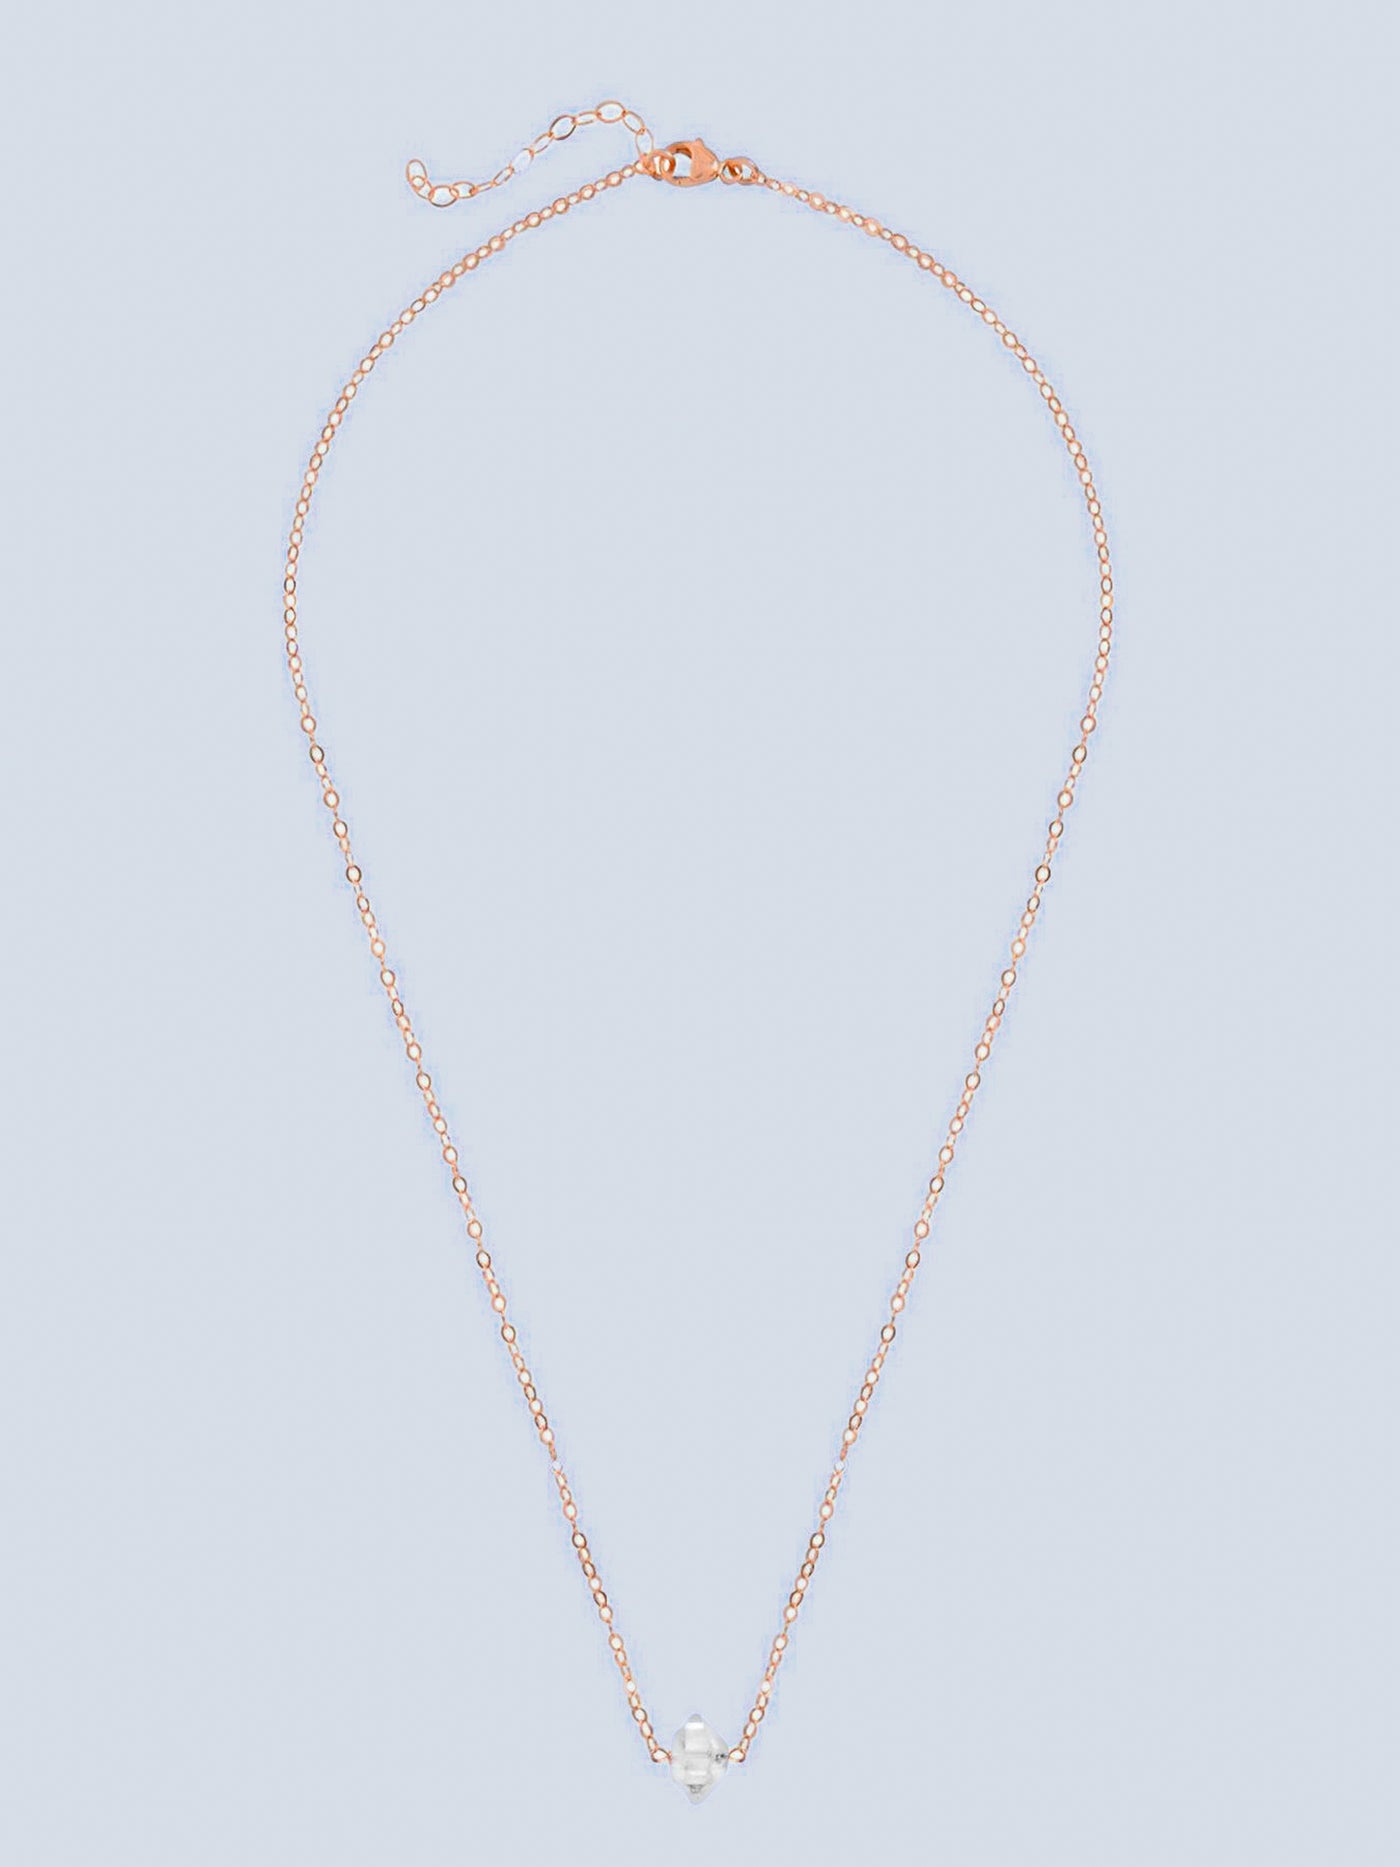 Herkimer Diamond Gold Addison Necklace. A delicate 14k rose gold fill chain choker featuring a Herkimer diamond, with an added extension chain to ensure a perfect fit. Adjustable length.